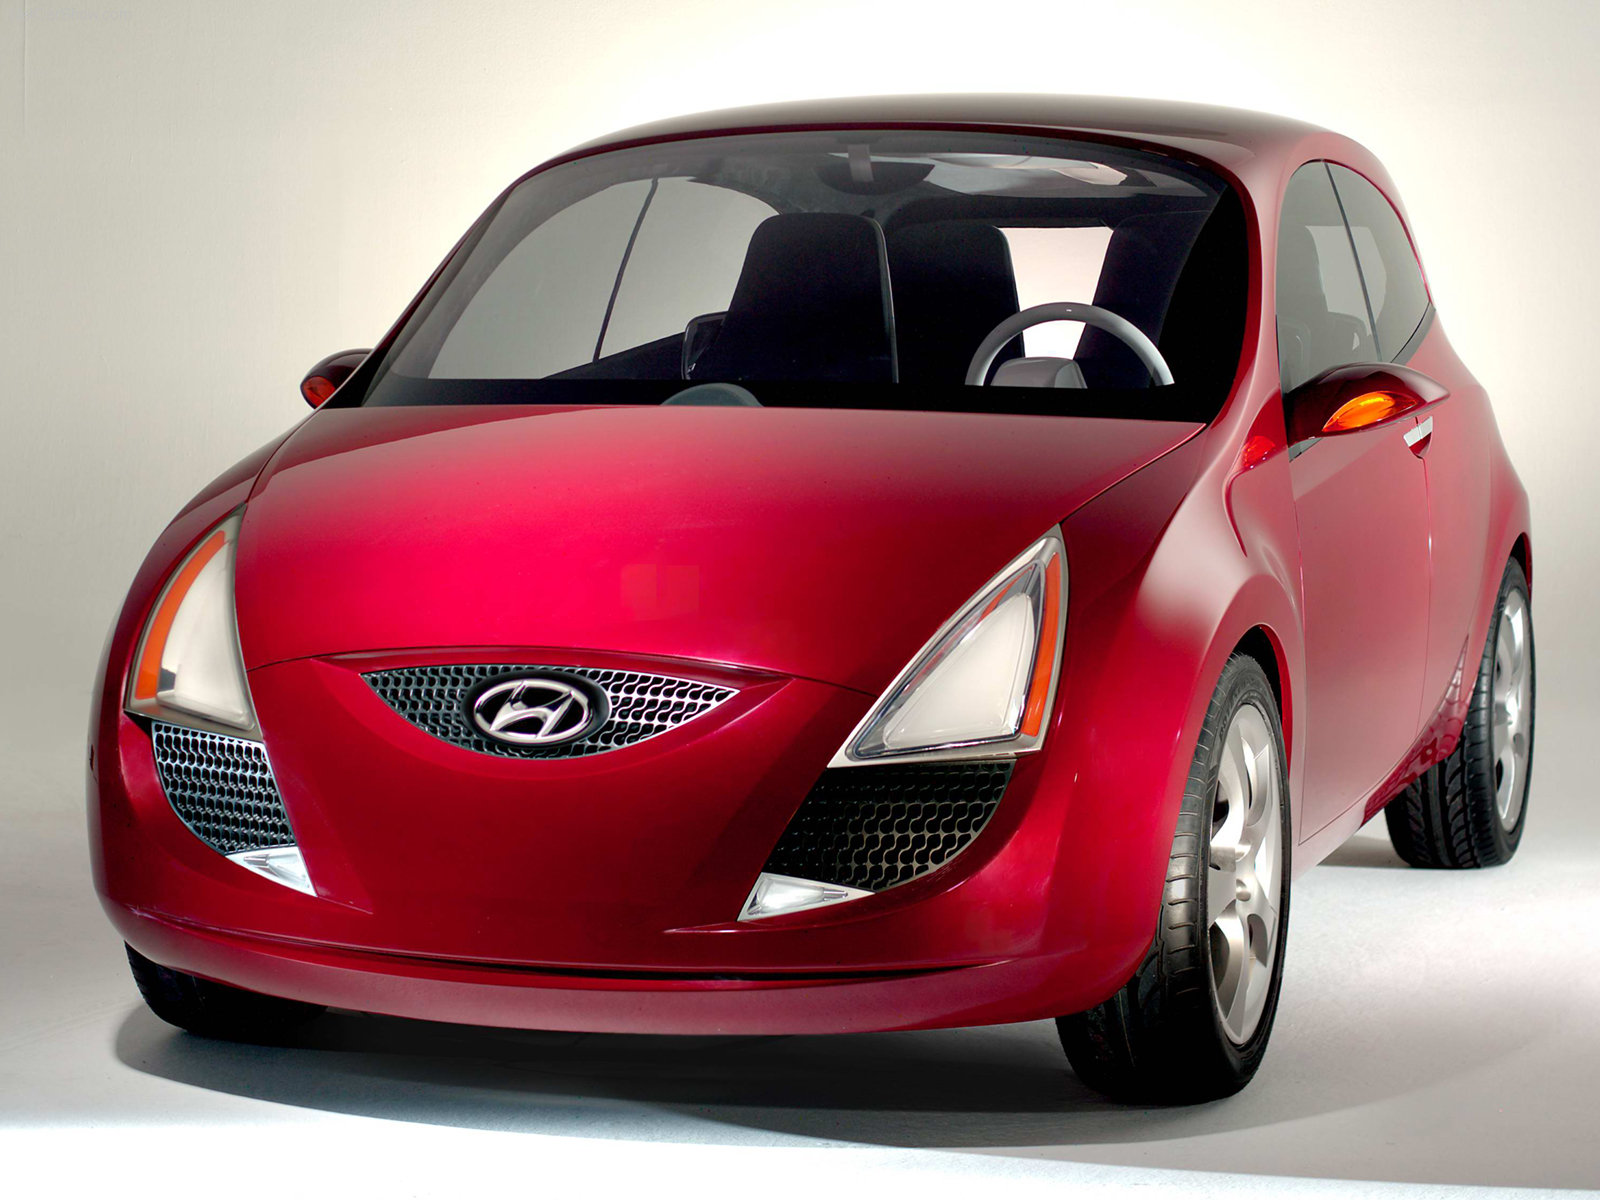 Hyundai HED 1 Concept 2005 Hyundai-HED_1_Concept-2005-1600-01